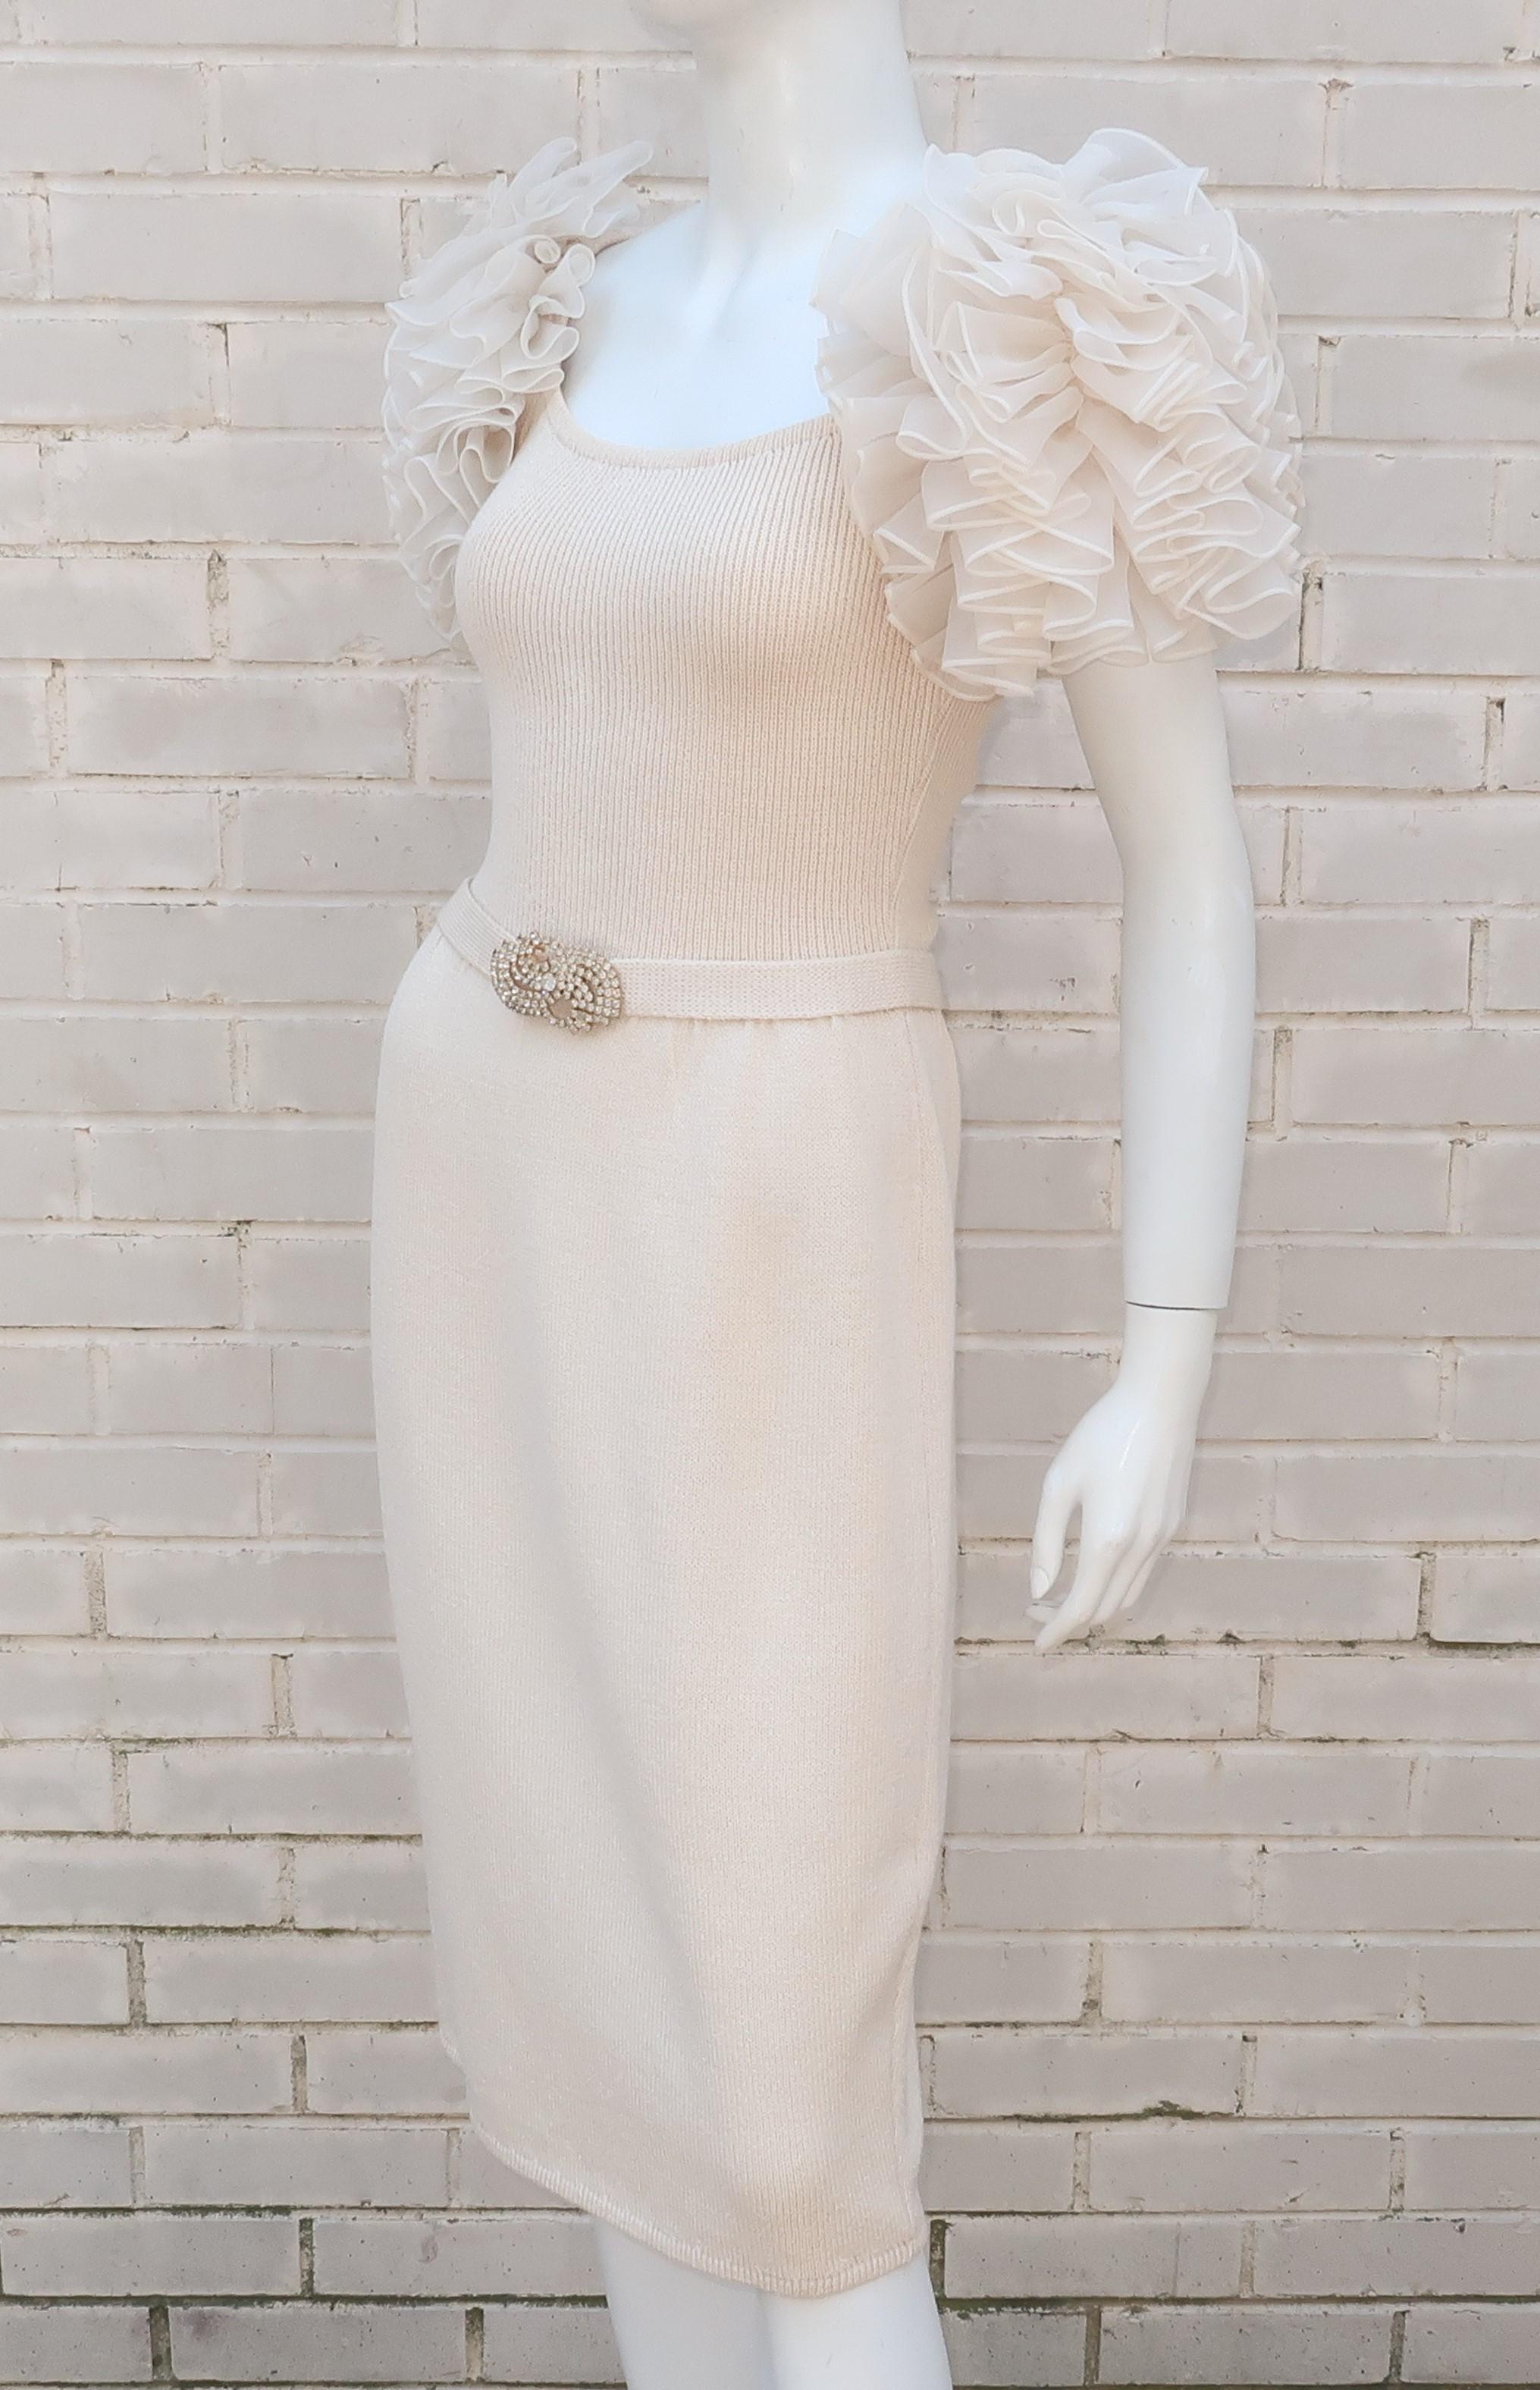 Ivory White Knit Cocktail Dress With Ruffled Sleeves & Rhinestones, C.1980 4